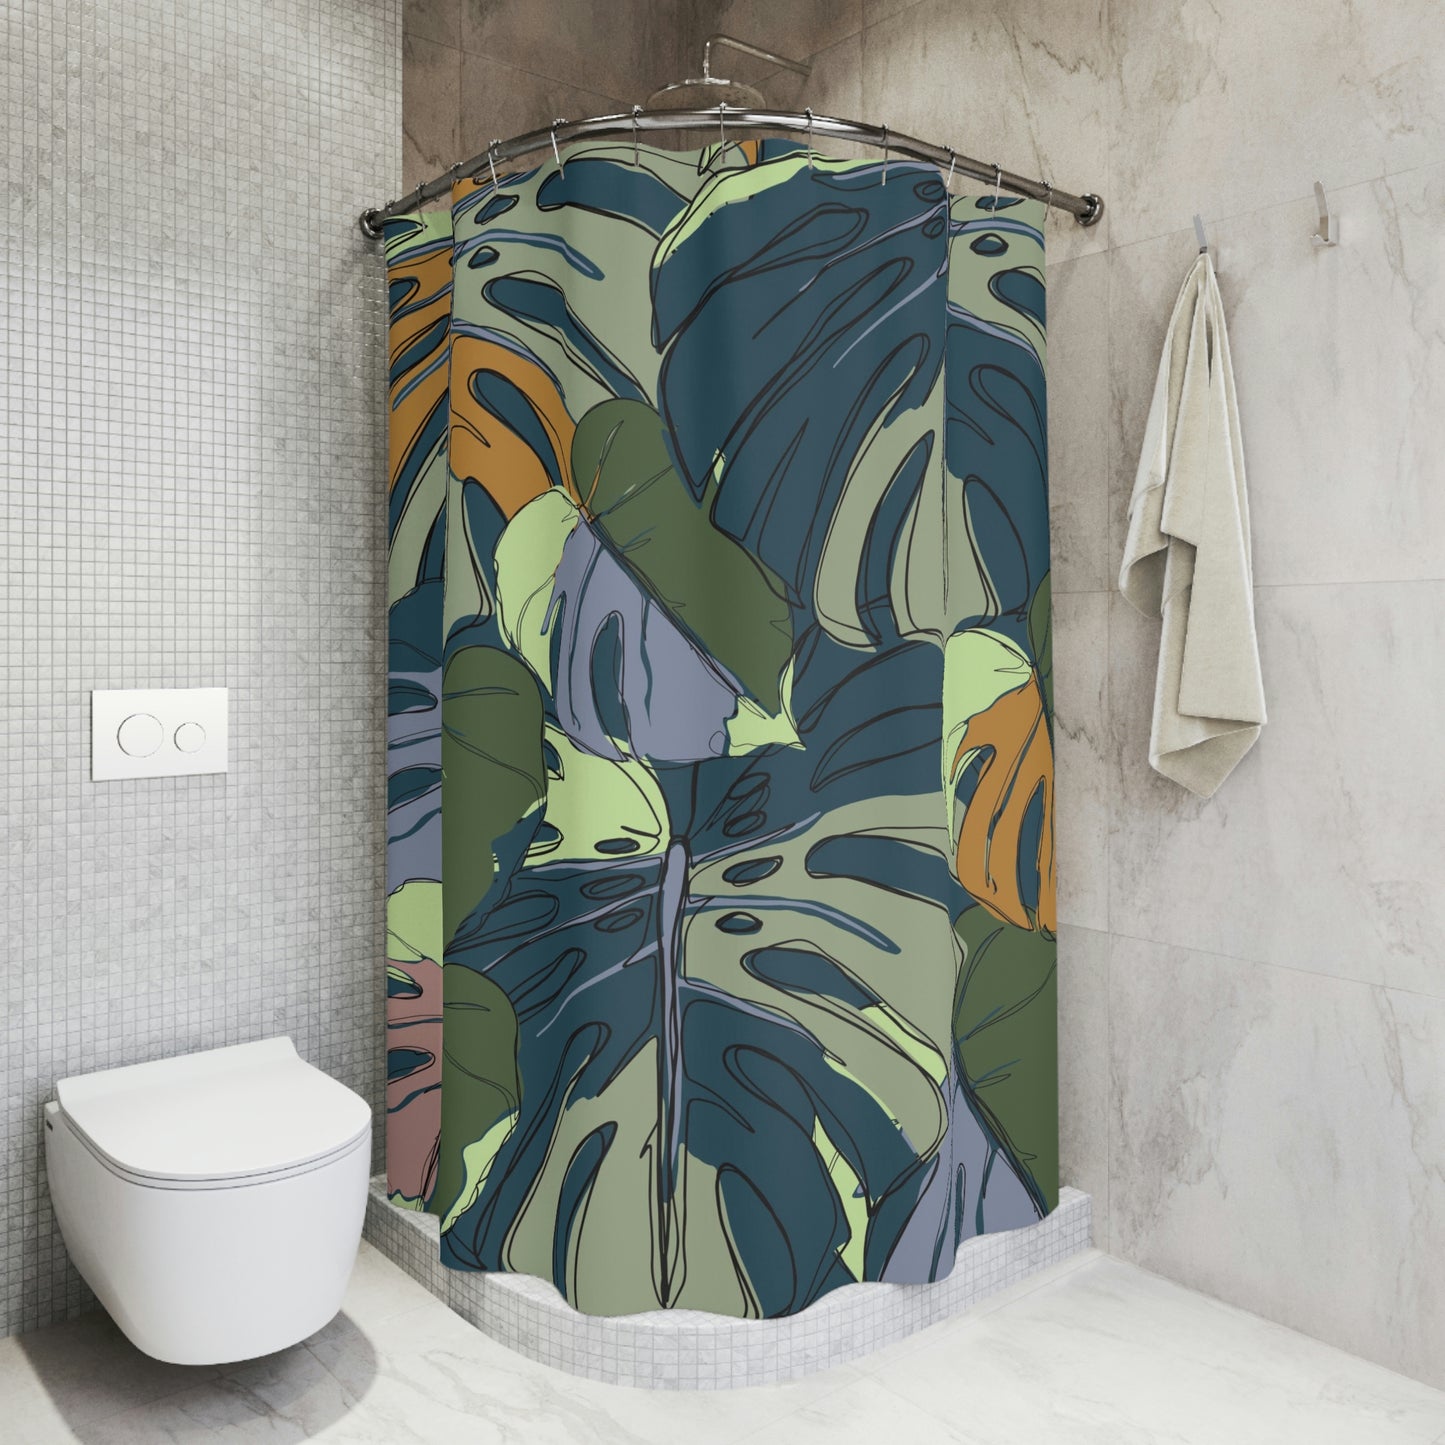 Hawaii Monstera Collection Shower Curtain, Tropical Custom Designed Monstera Leaf Shower Curtain